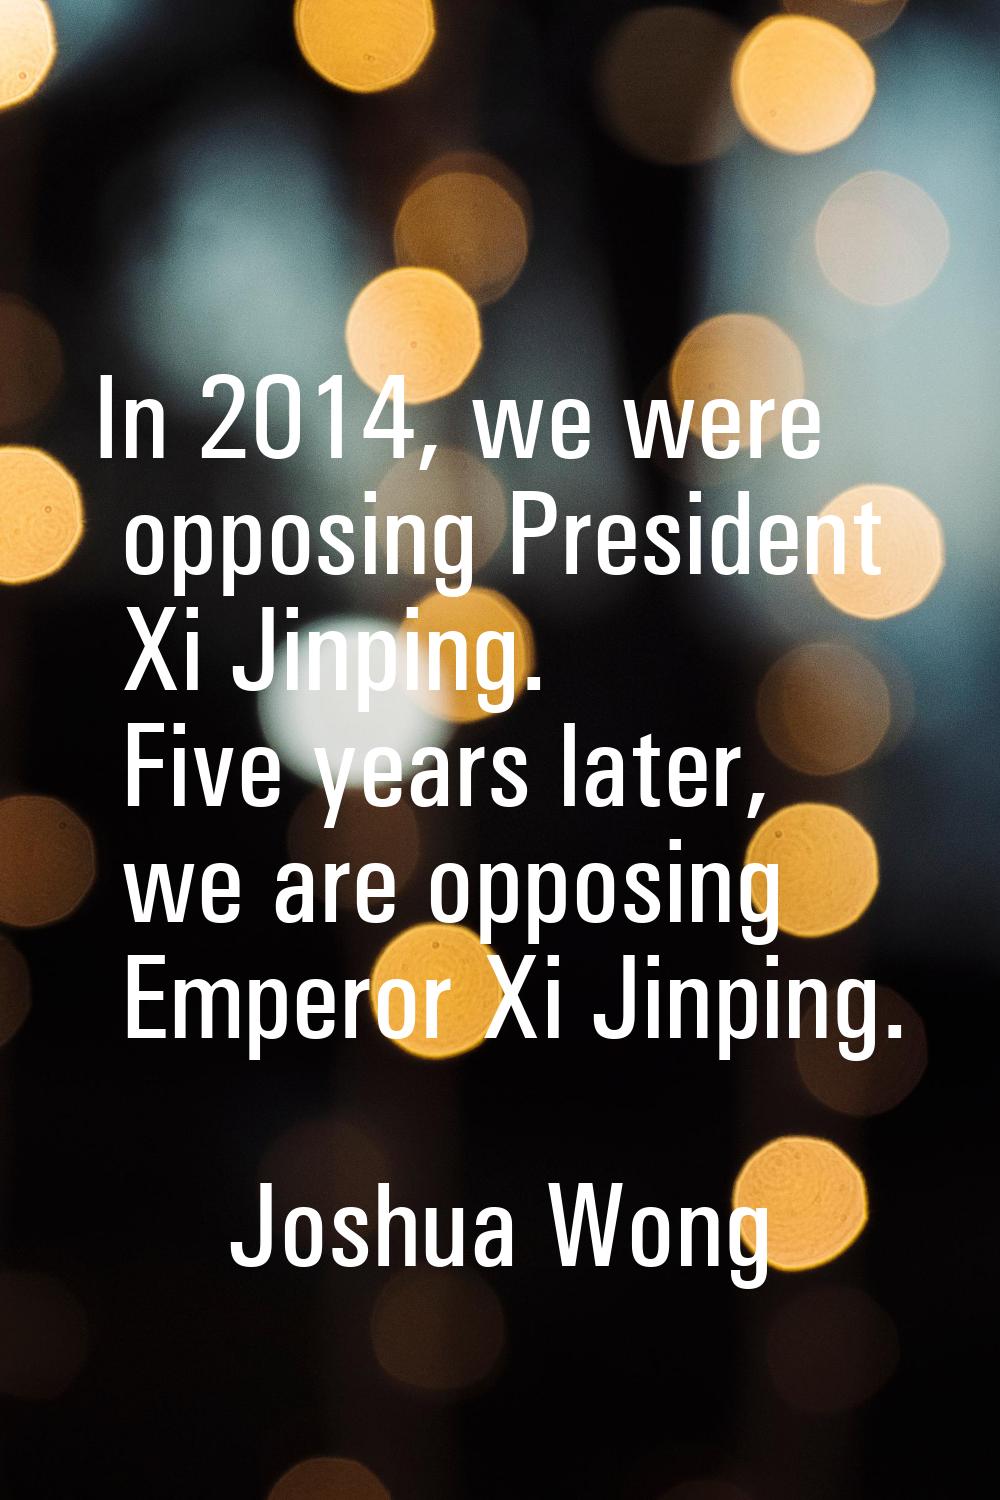 In 2014, we were opposing President Xi Jinping. Five years later, we are opposing Emperor Xi Jinpin